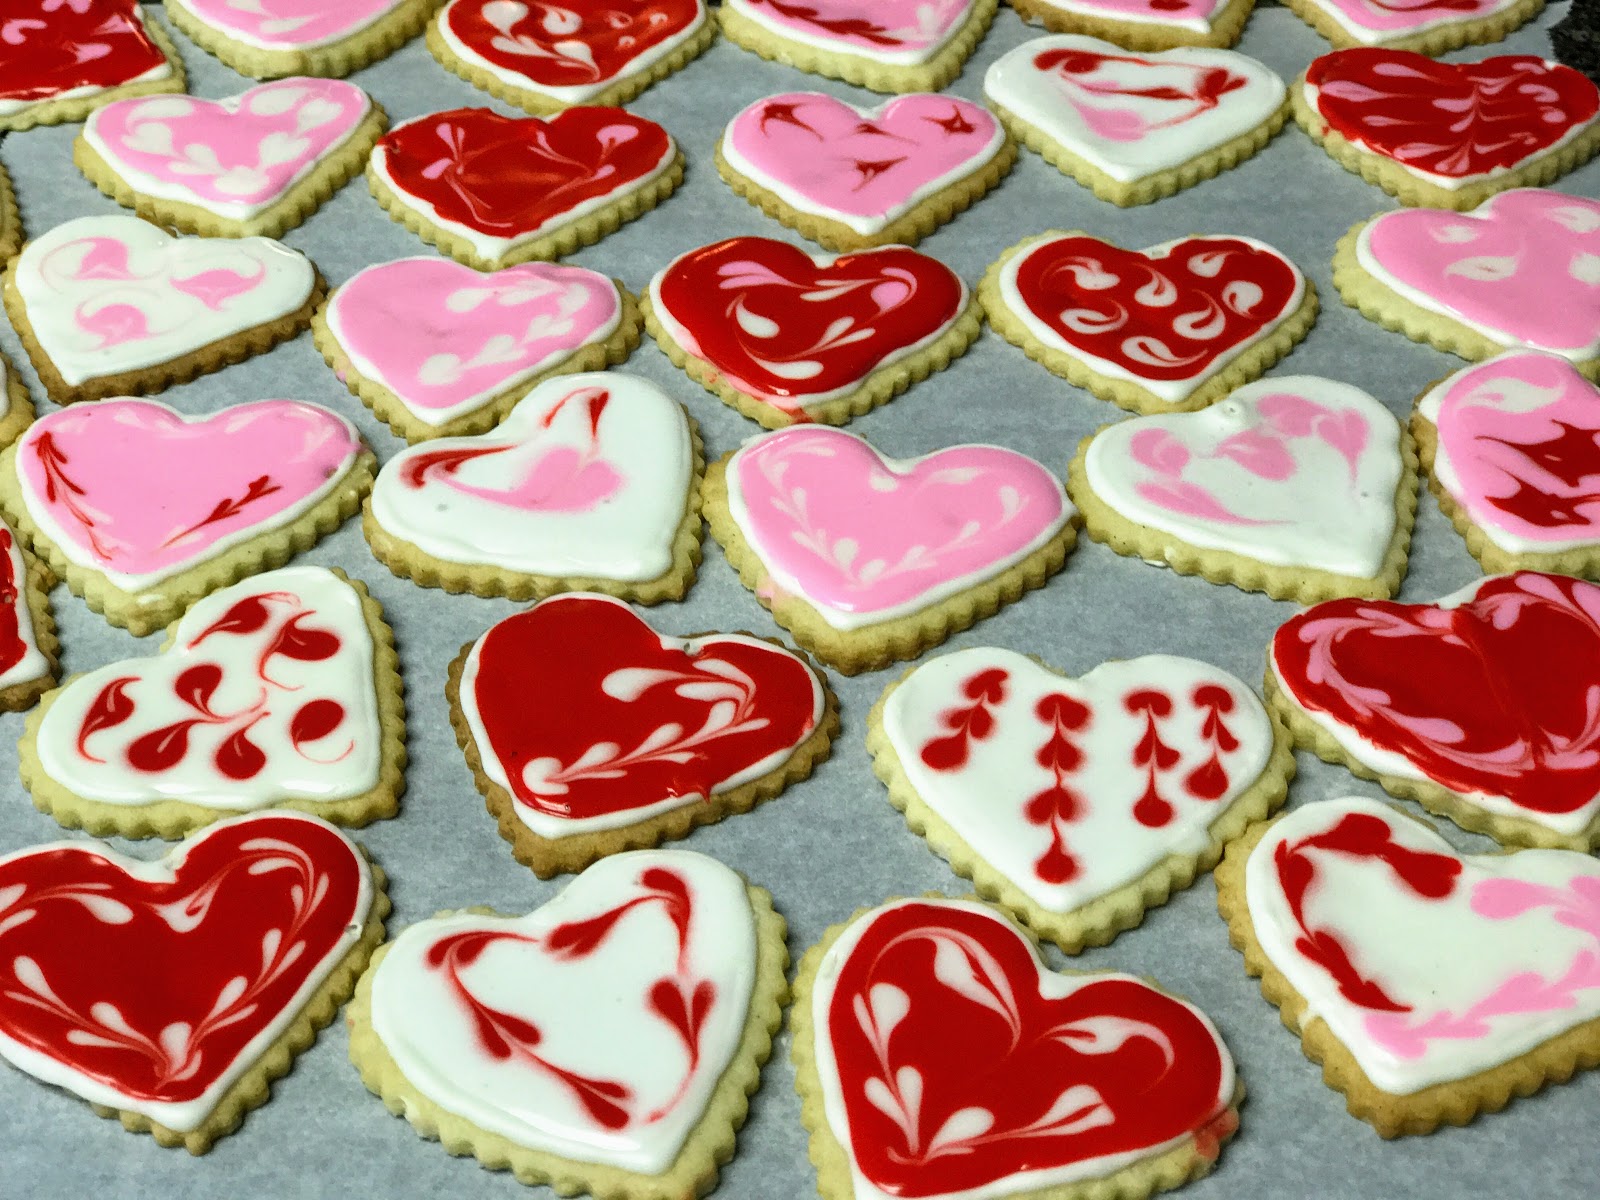 Mennonite Girls Can Cook Valentine Sugar Cookies with Dragged Dots